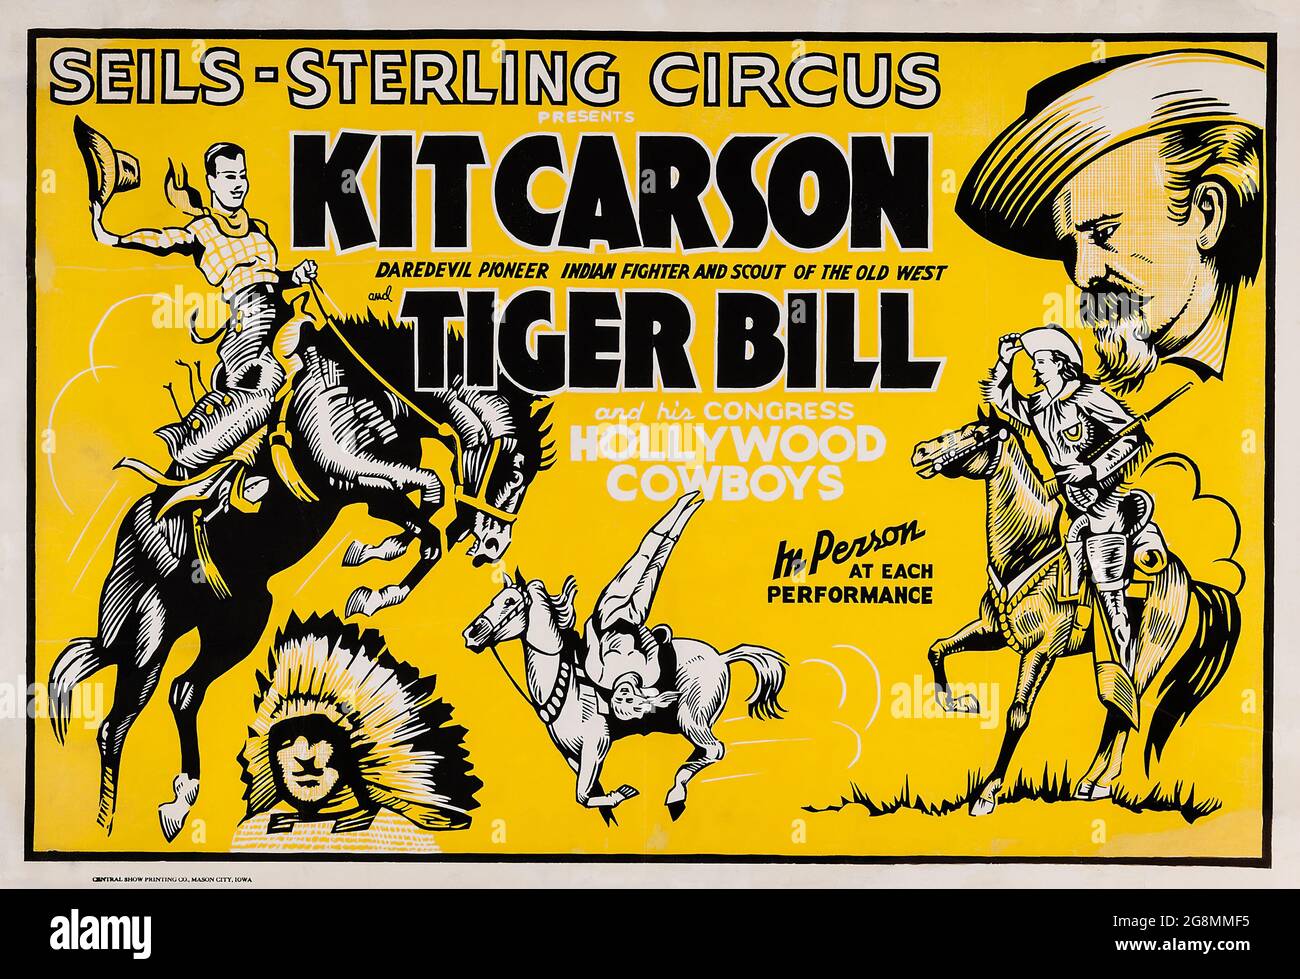 Kit Carson in the Seils-Sterling Circus (Central Show Printing Co., 1930er Jahre) Vintage Circus Poster mit Tiger Bill. Stockfoto